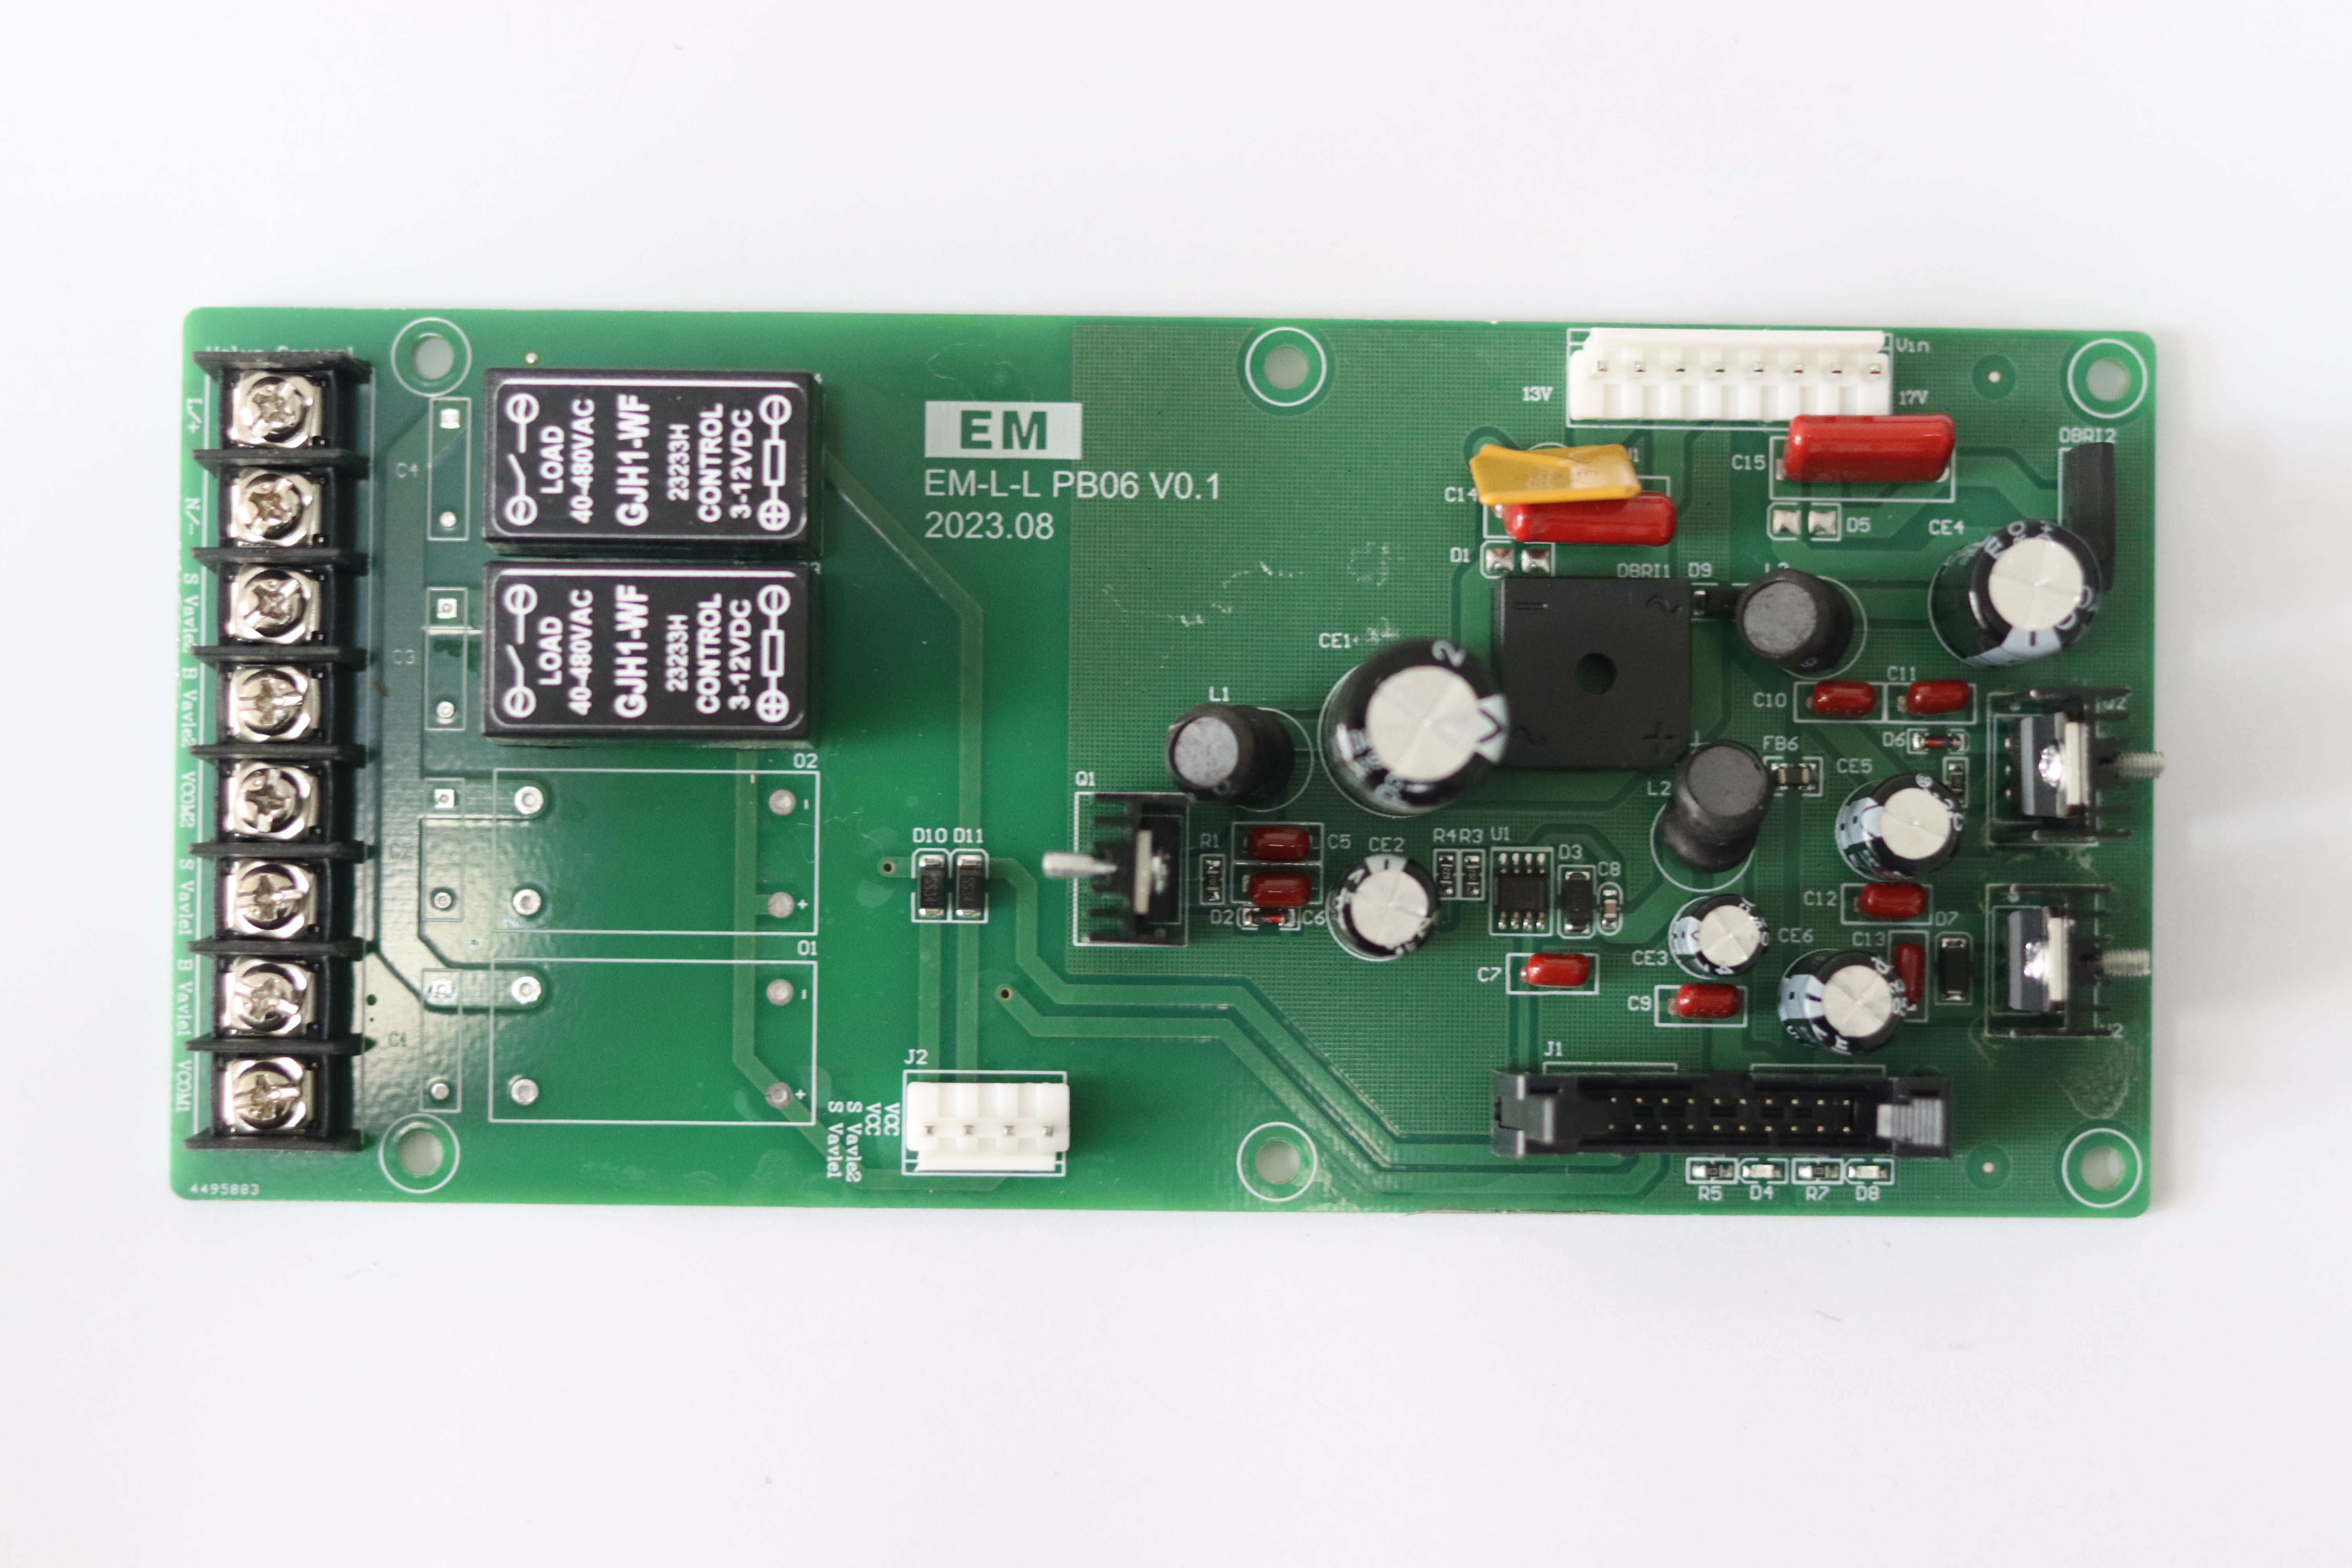 Ecotec Power Board for Electronic Controller for Fuel/LPG/CNG Dispenser Whole Sale Management System